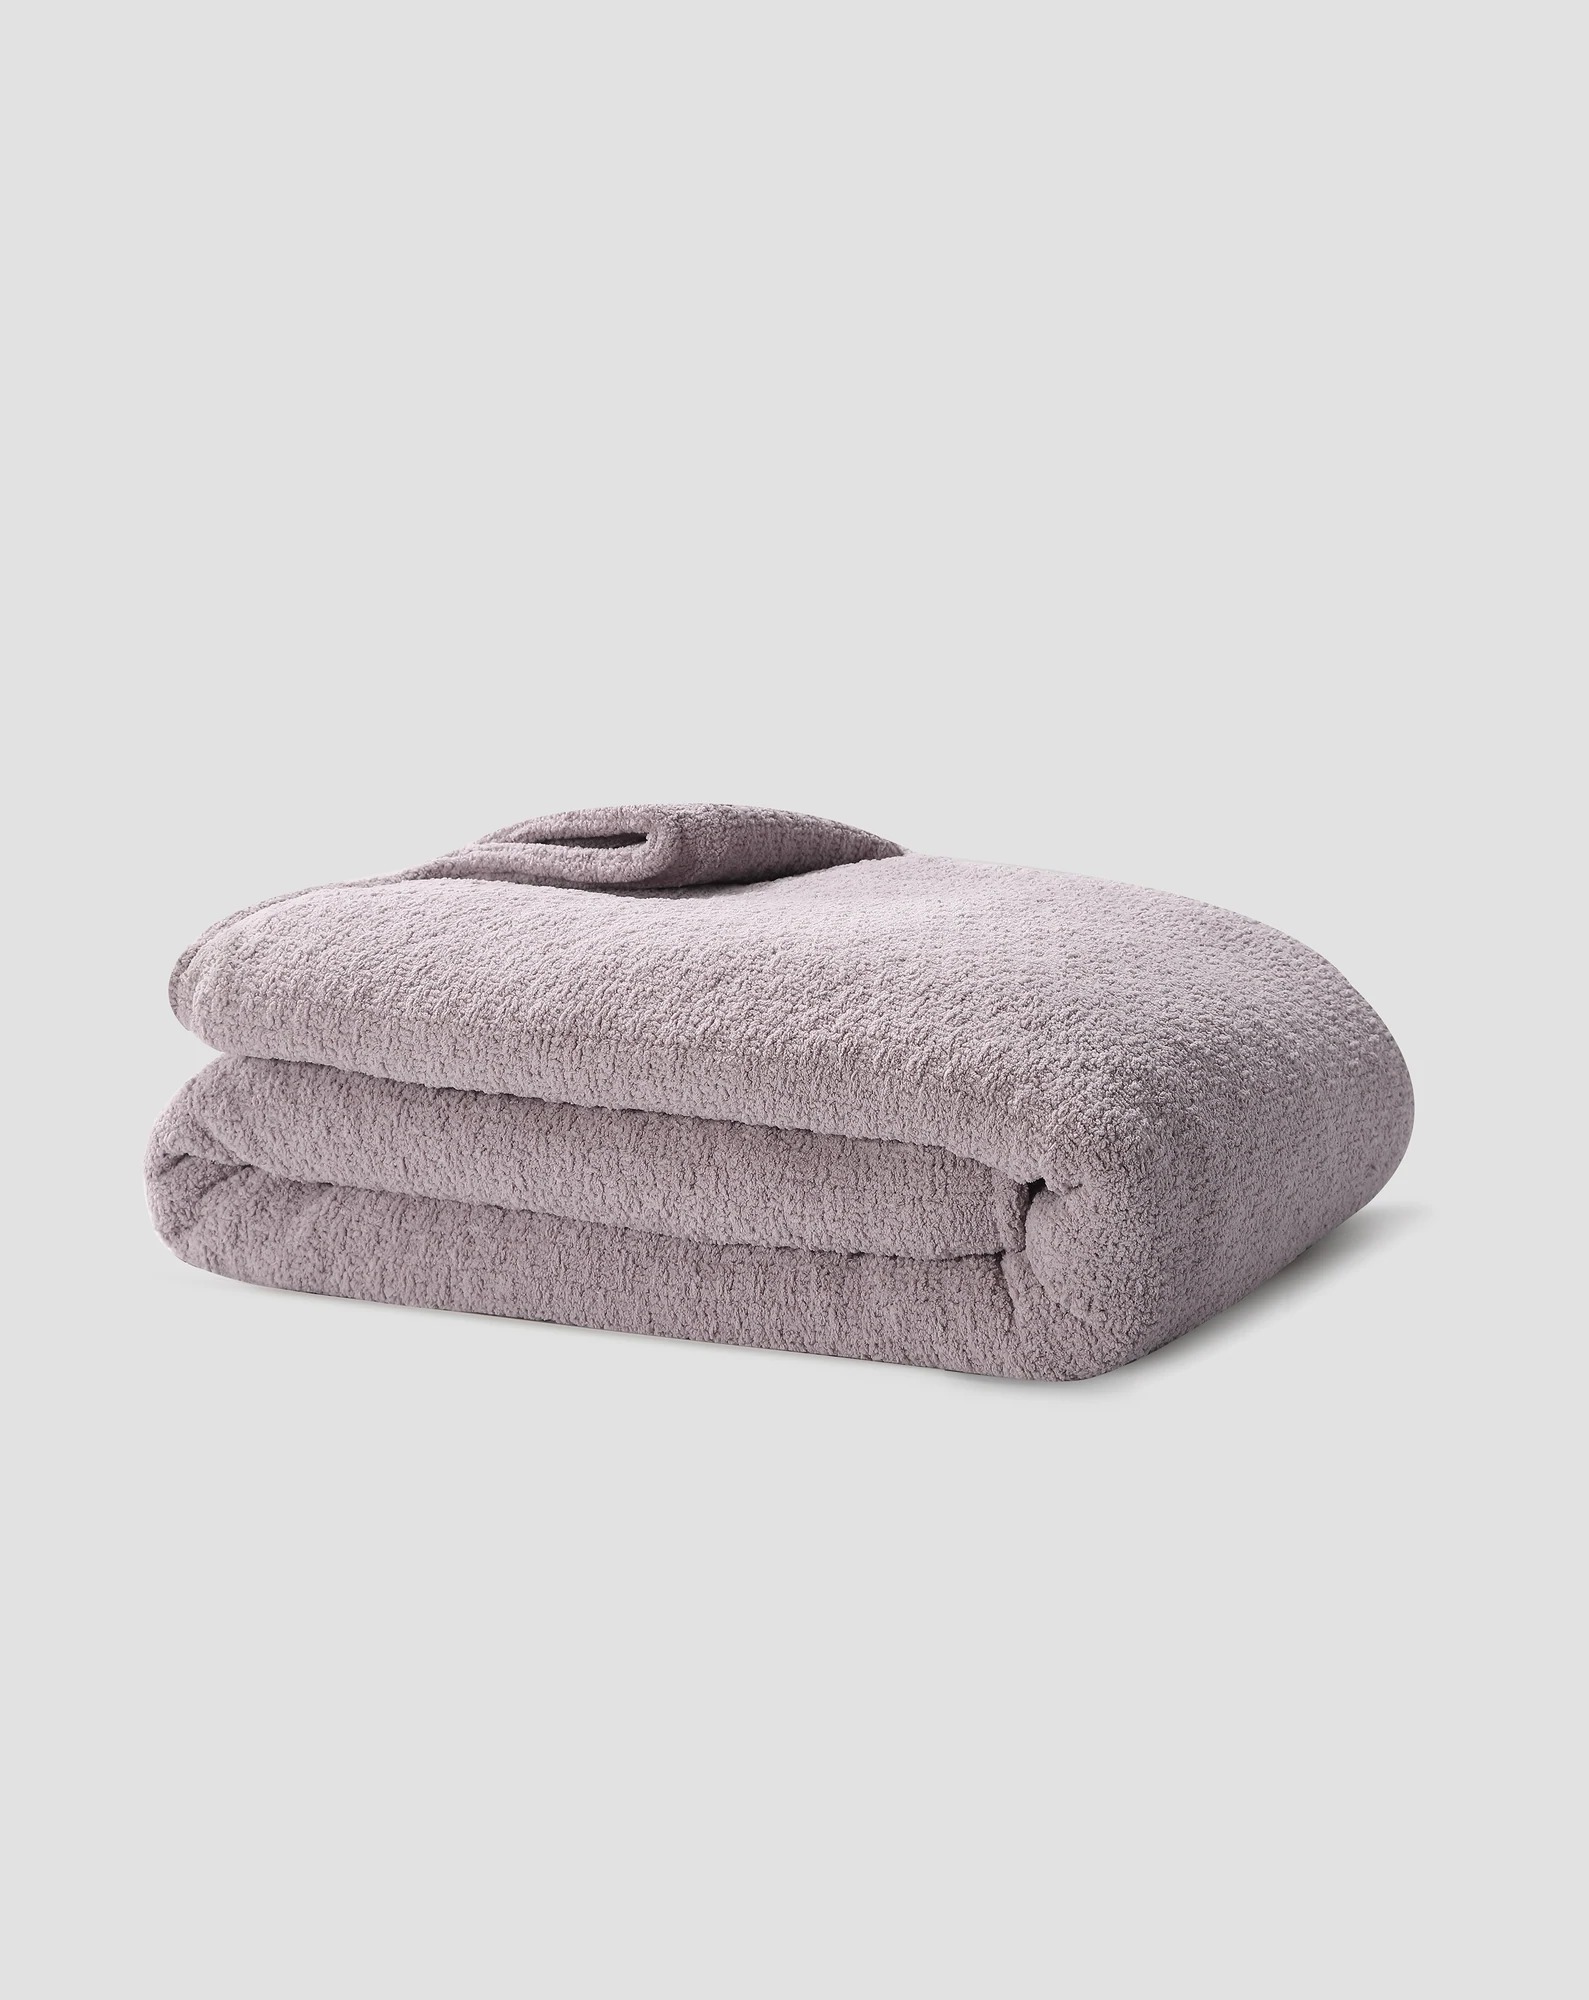 luxurious weighted blanket for sleep